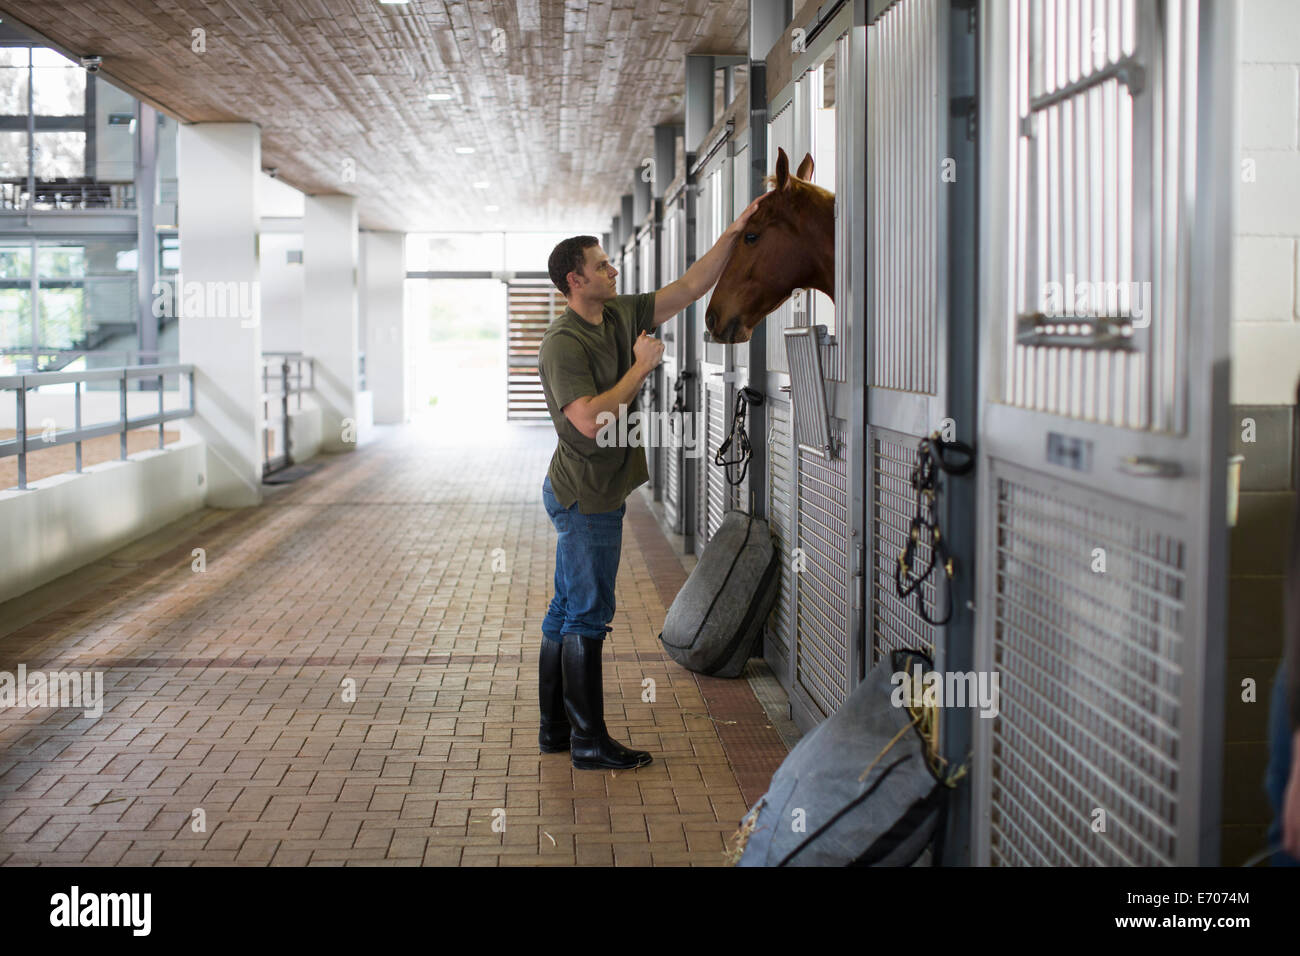 Male stablehand petting horse in stables Stock Photo